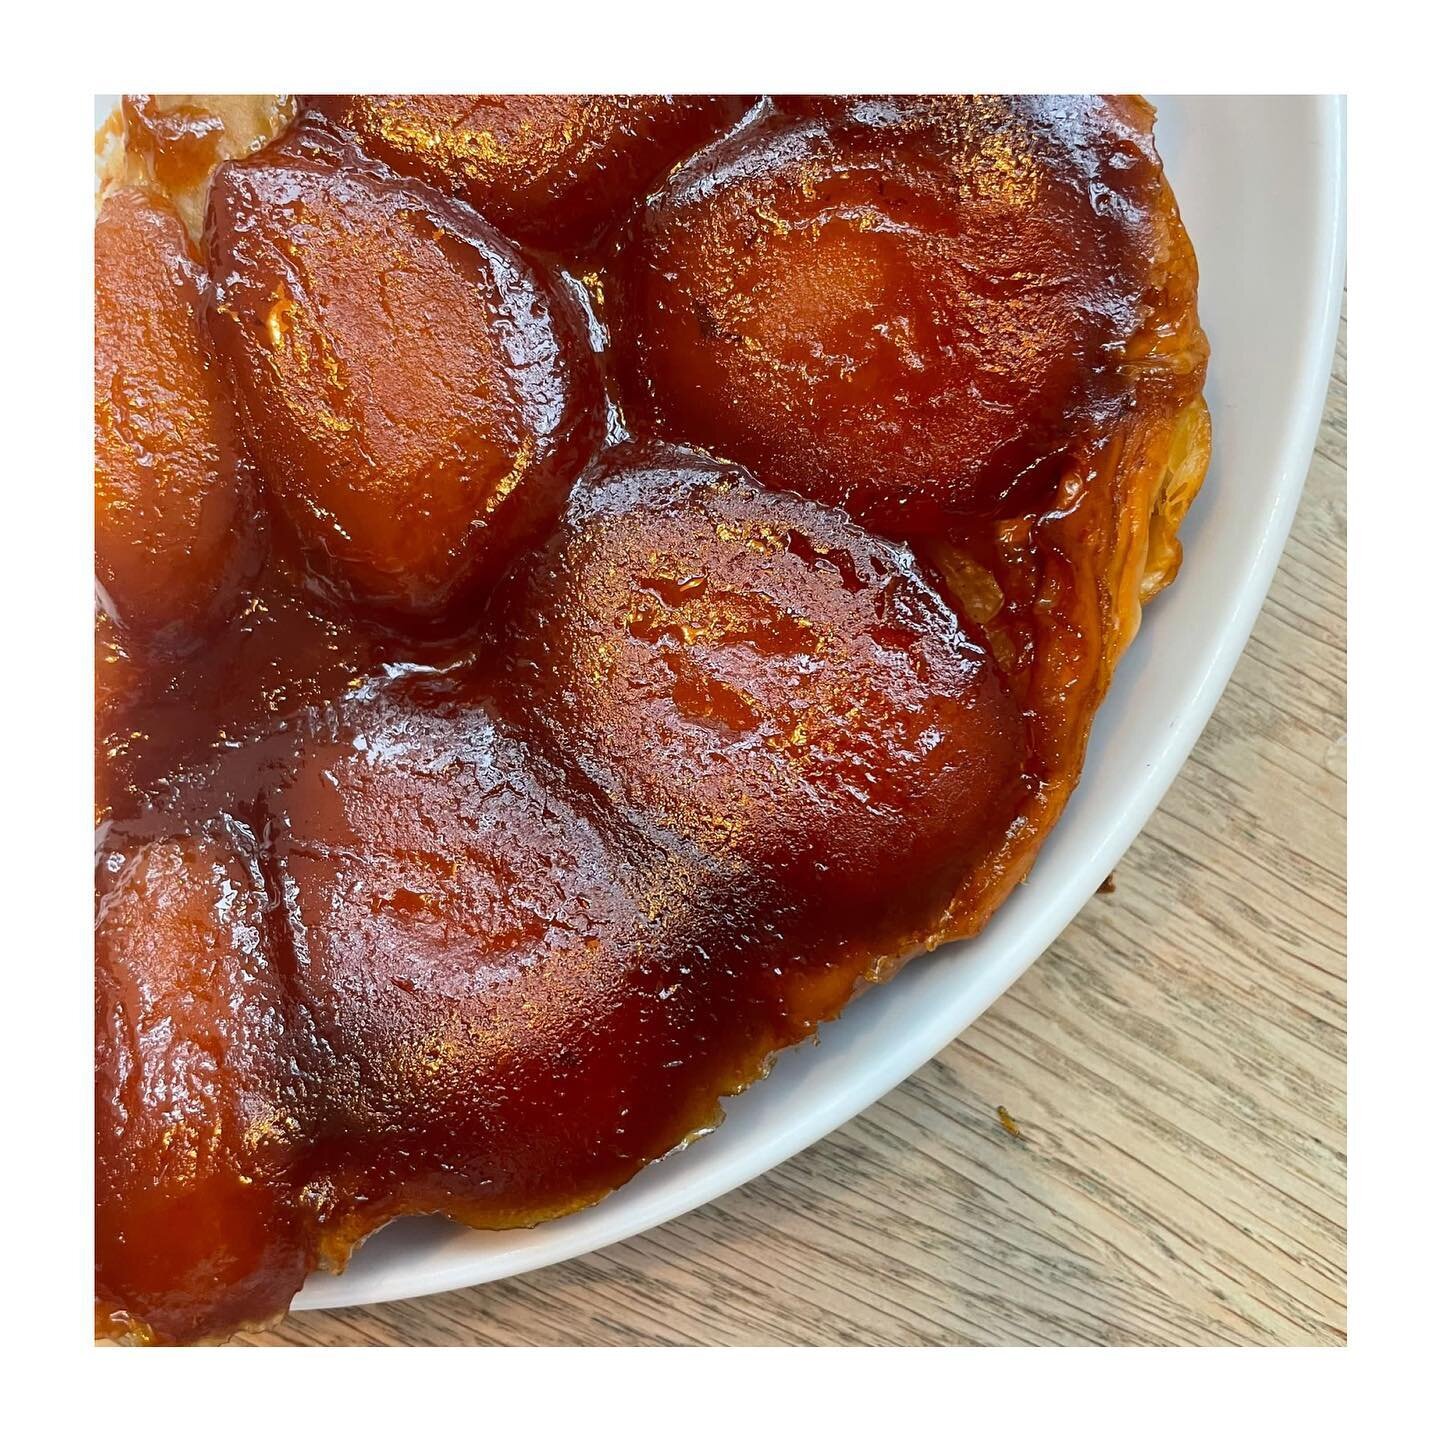 British Apple Tarte Tatin featuring as the French inspired dessert on our Beaujolais Nouveau menu this eve&hellip; get it before its gone / eaten by the kitchen!